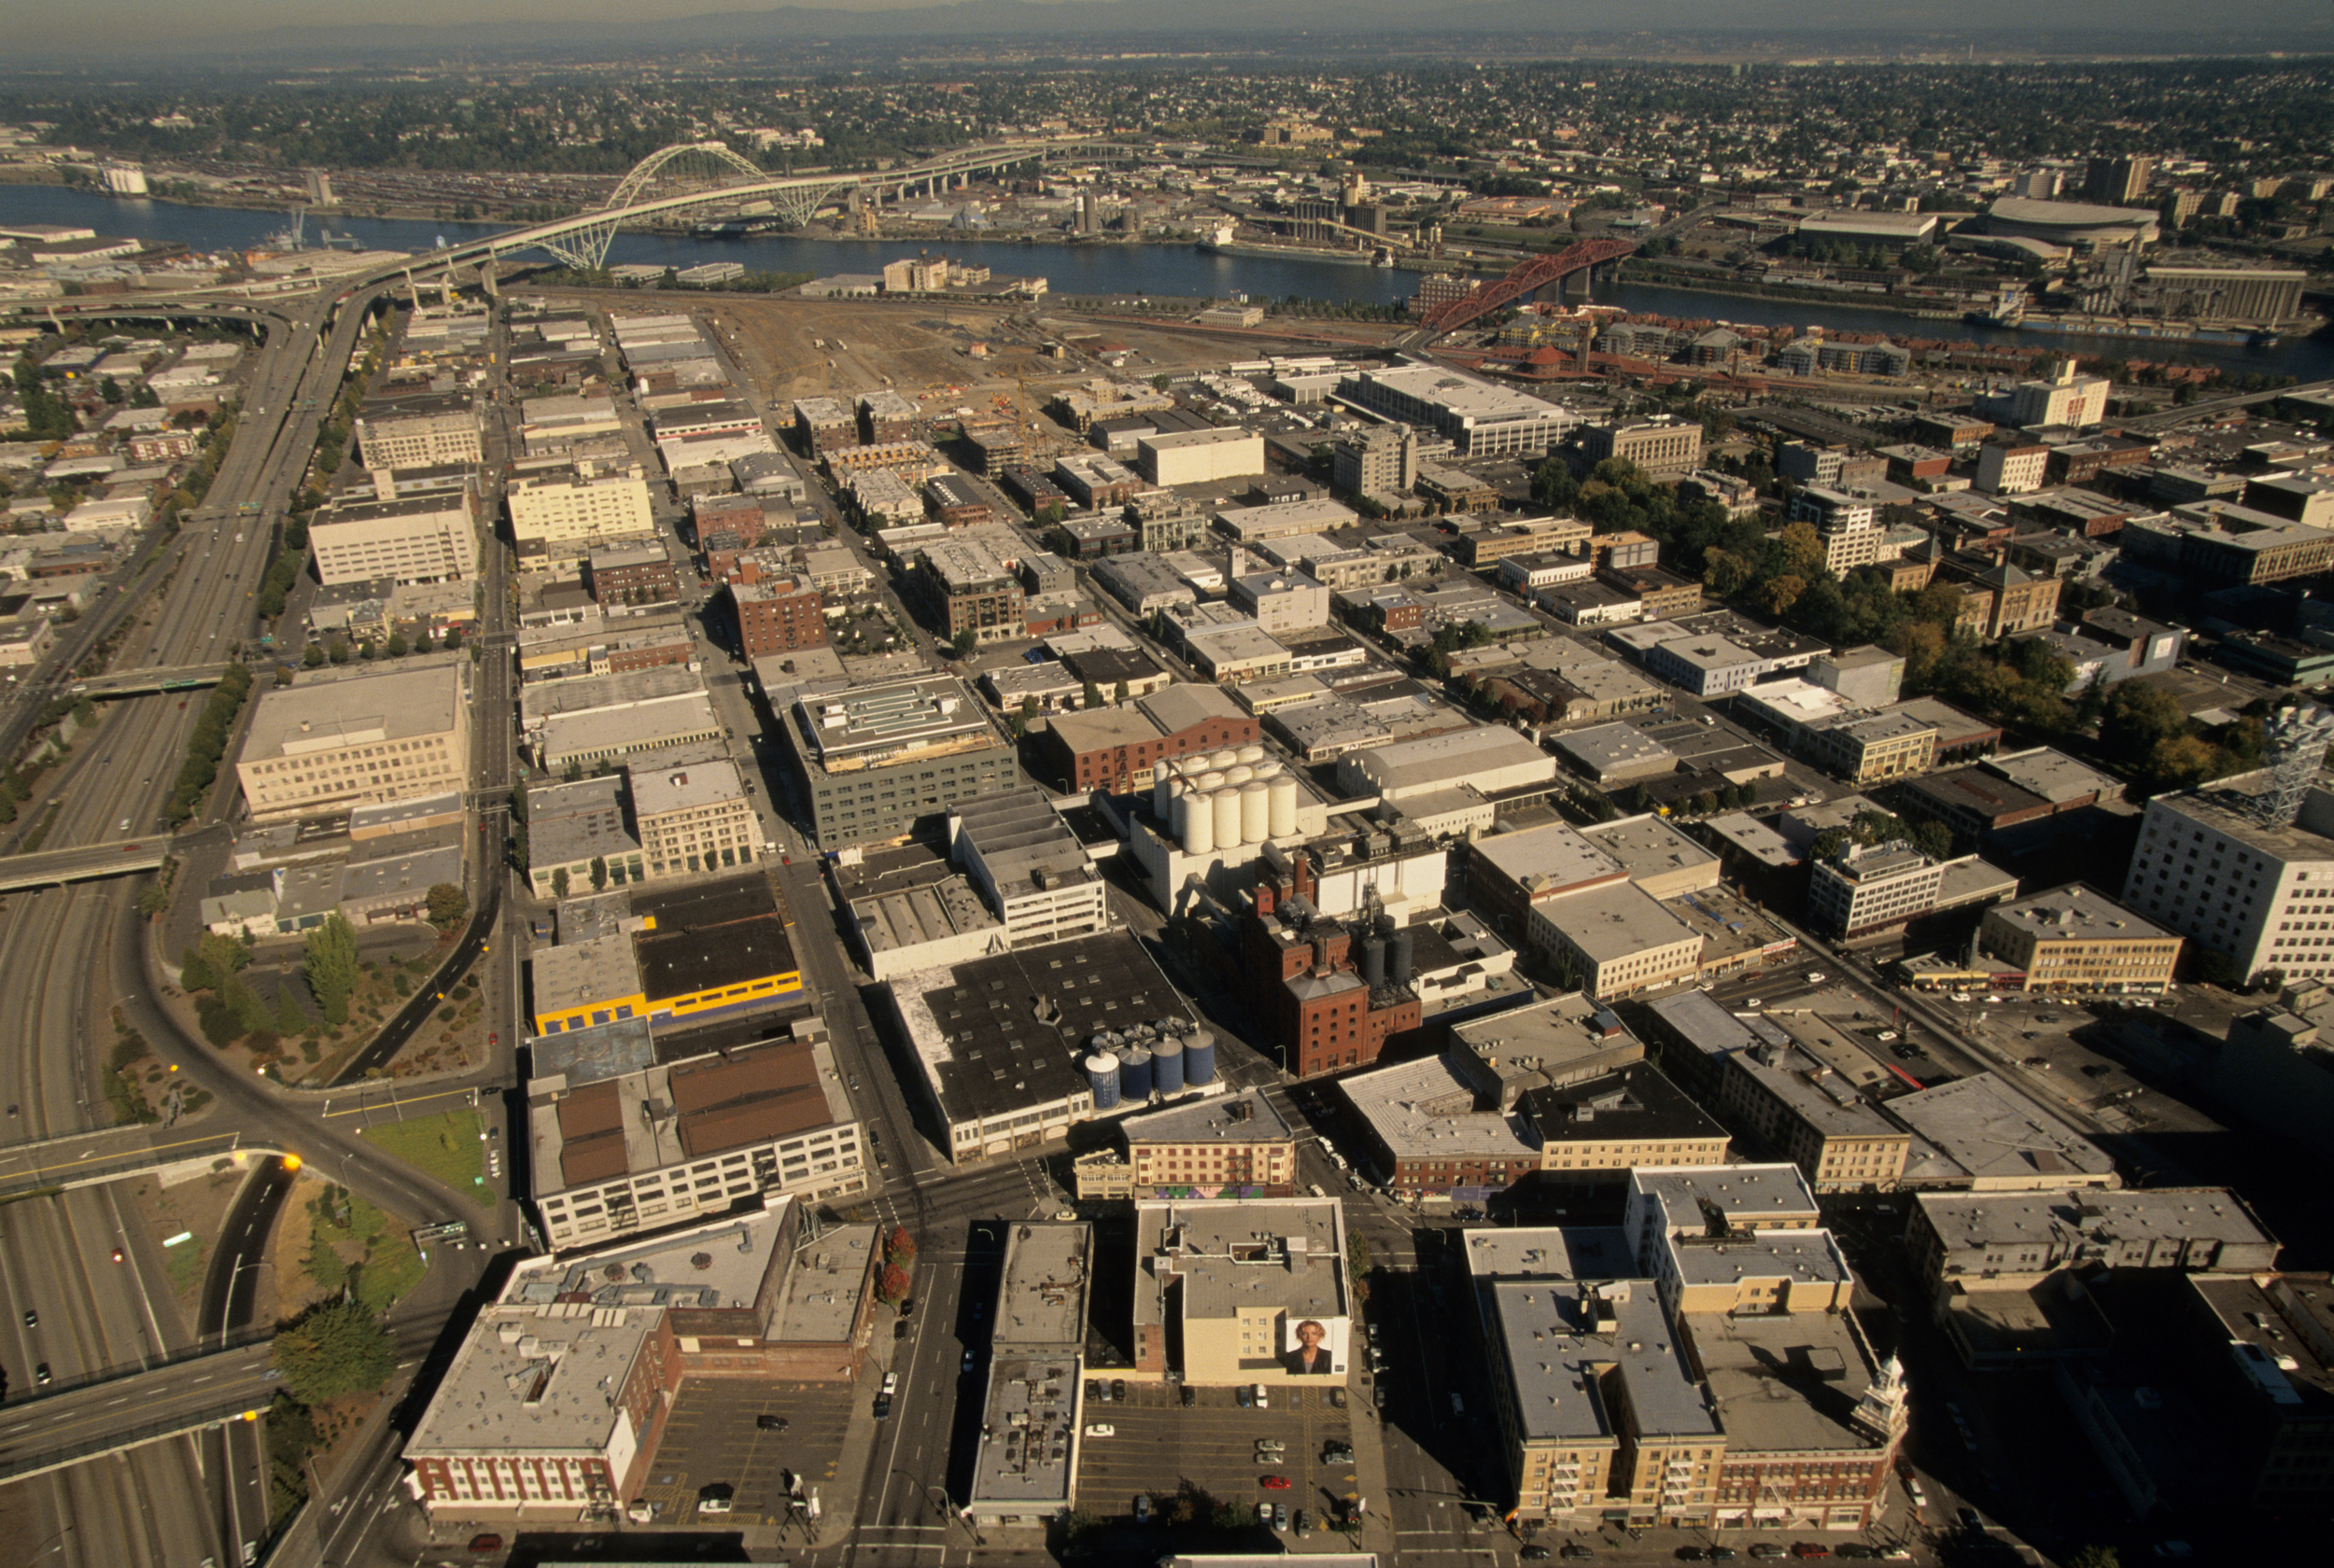  Adaptive reuse of old warehouses continued, but a checkerboard of new city blocks began to sprout mid and high-rise structures.&nbsp; The Northwest Triangle was becoming the Pearl District.&nbsp;Photo by Bruce Forster© 